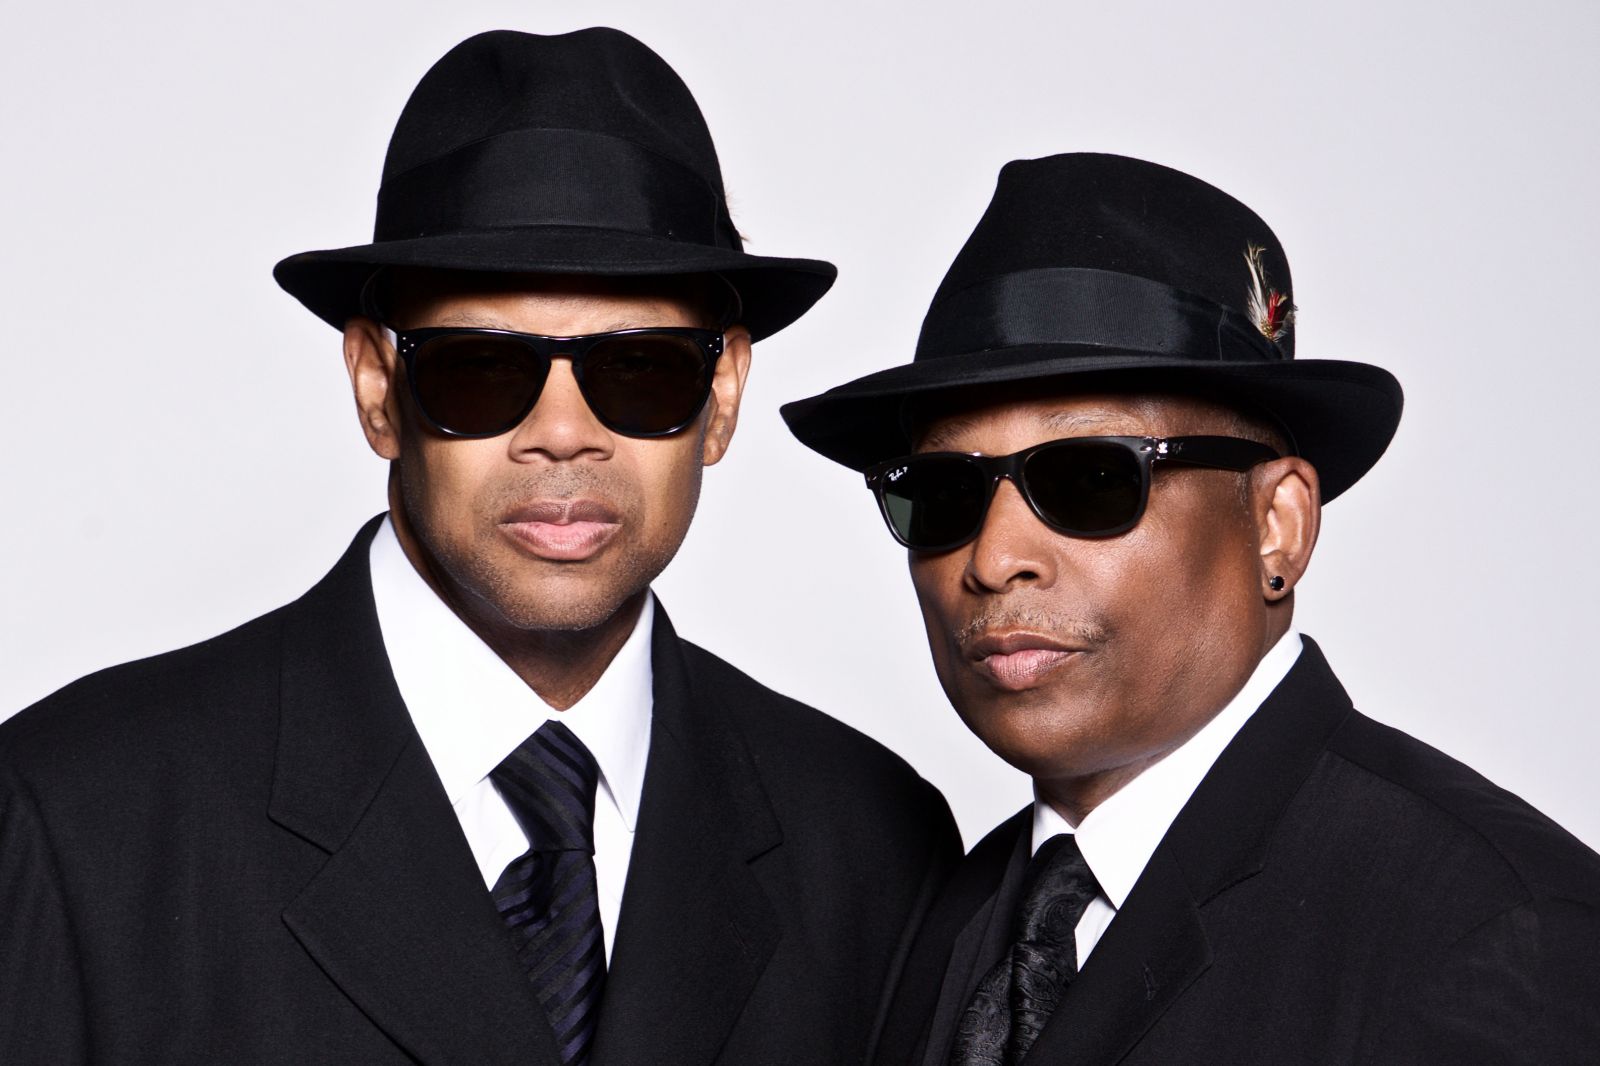 Terry Lewis with his partner Jimmy Jam